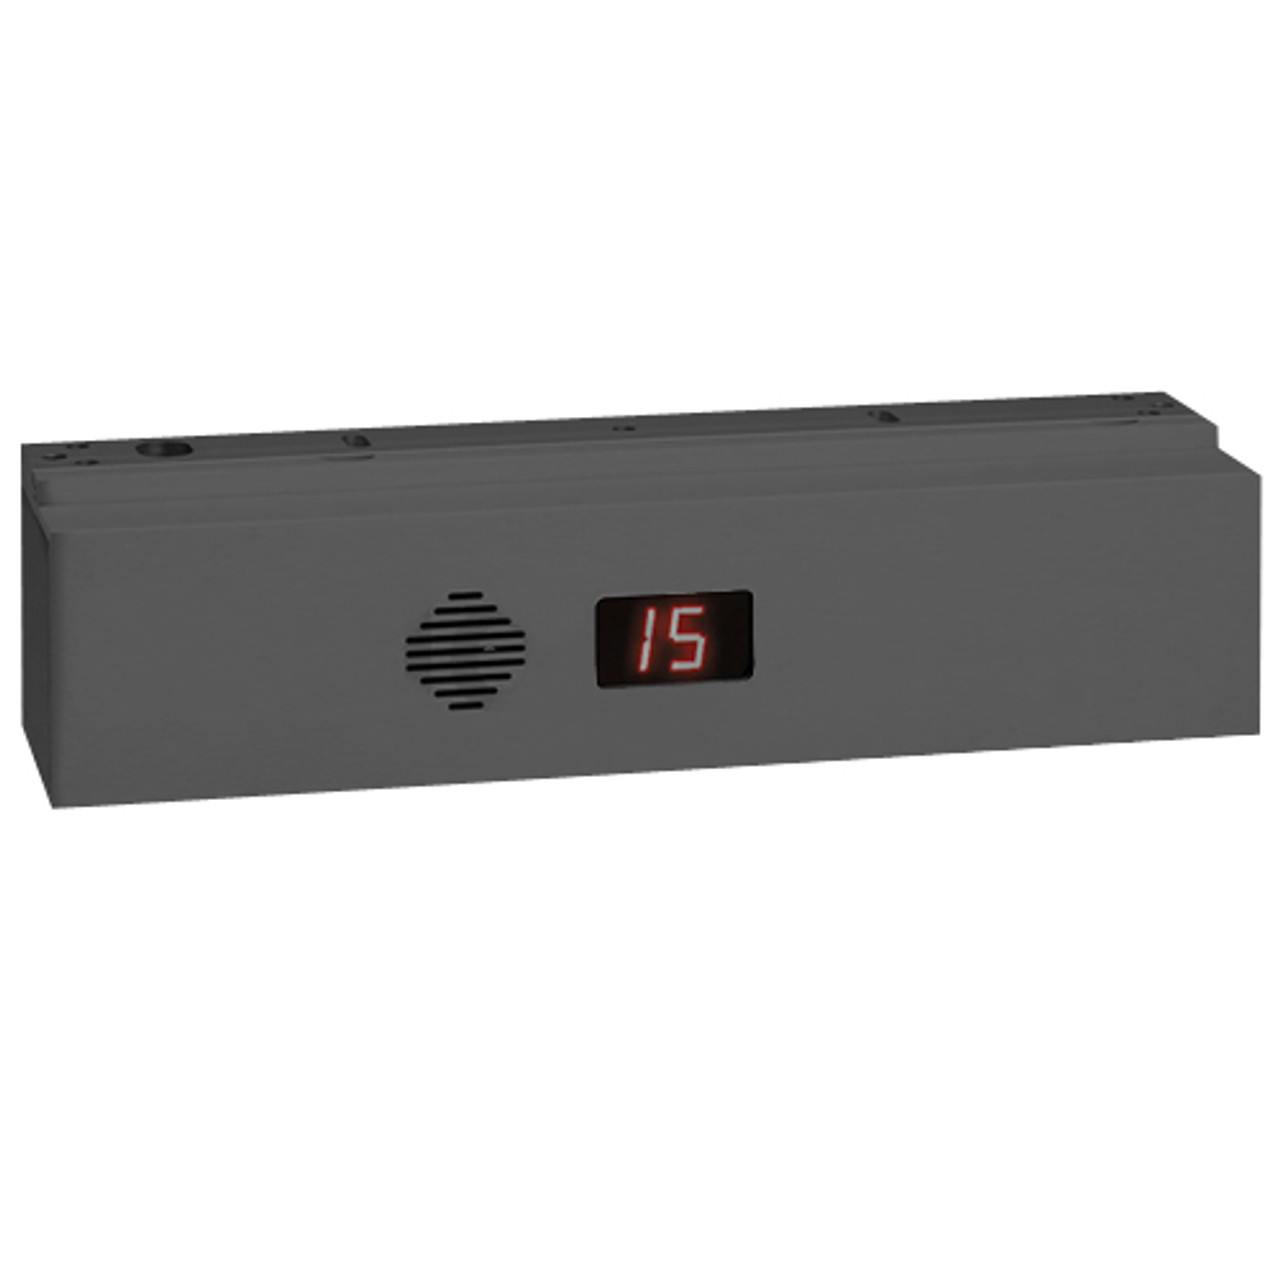 1511S-BD-L-Y-DBA SDC 1511S Series Single Integrated Delayed Egress Locks with Door Position Status and Magnetic Bond Sensor in Black Anodized